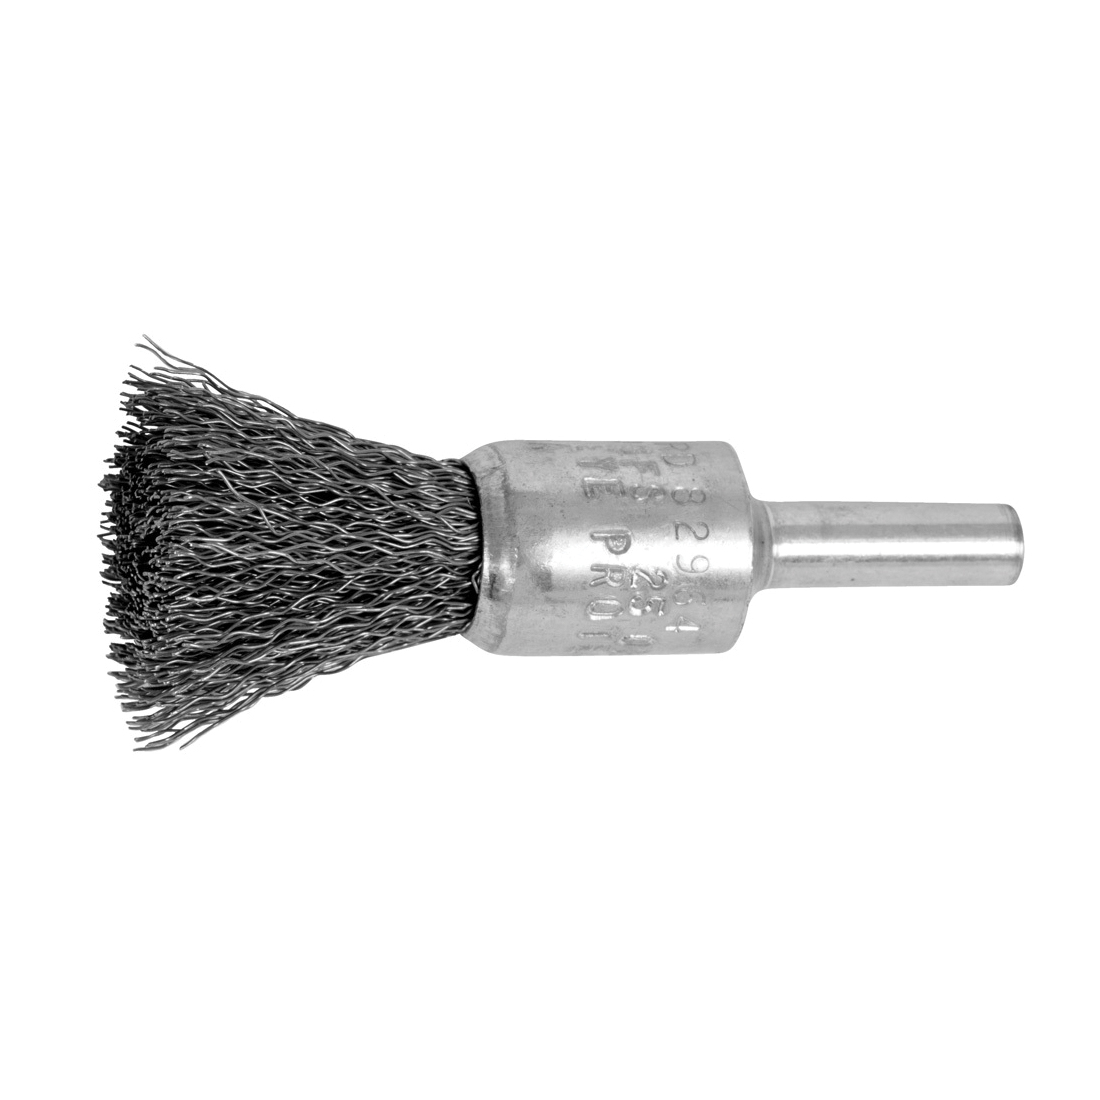 PFERD 83072 Flared Cup Stem Mount End Brush, 3/4 in, Knot, 0.014 in, Carbon Steel Fill, 1 in L Trim